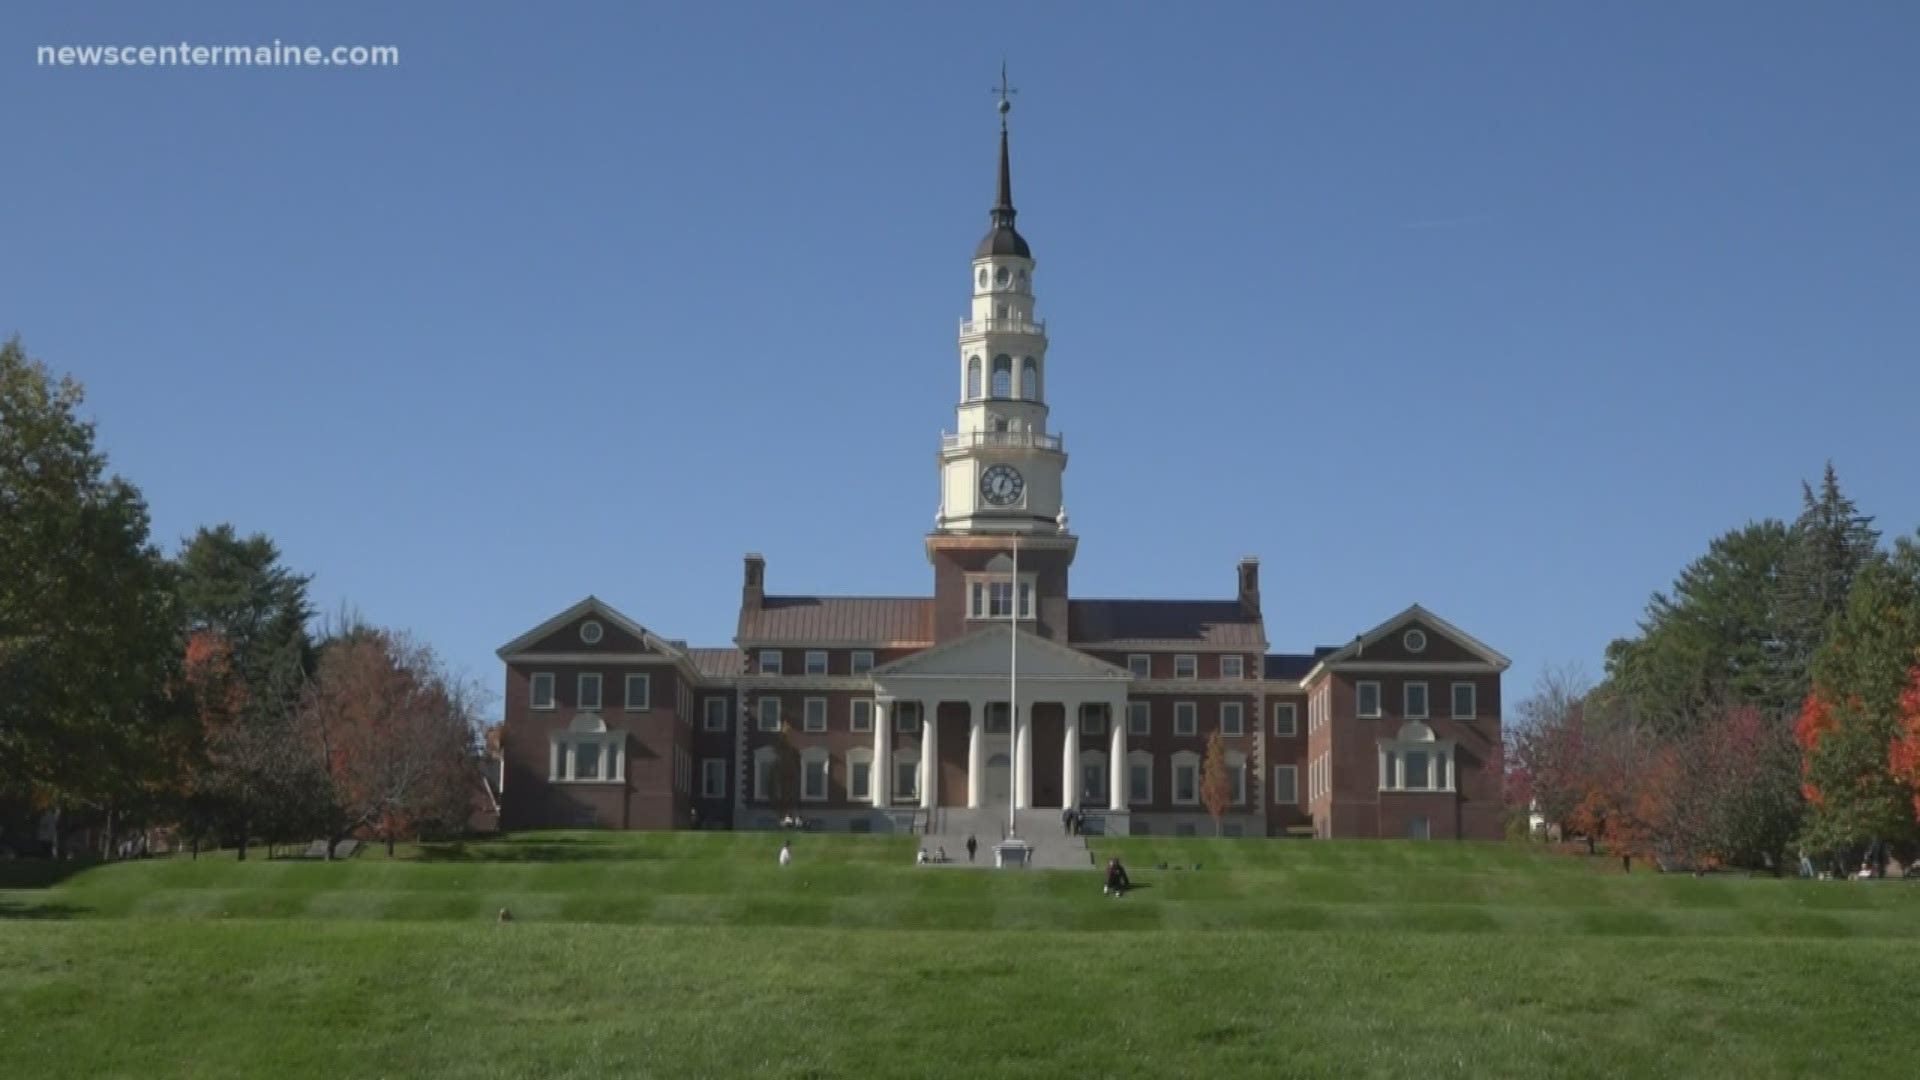 In the past five years, Colby College has pumped millions of dollars into the city of Waterville.